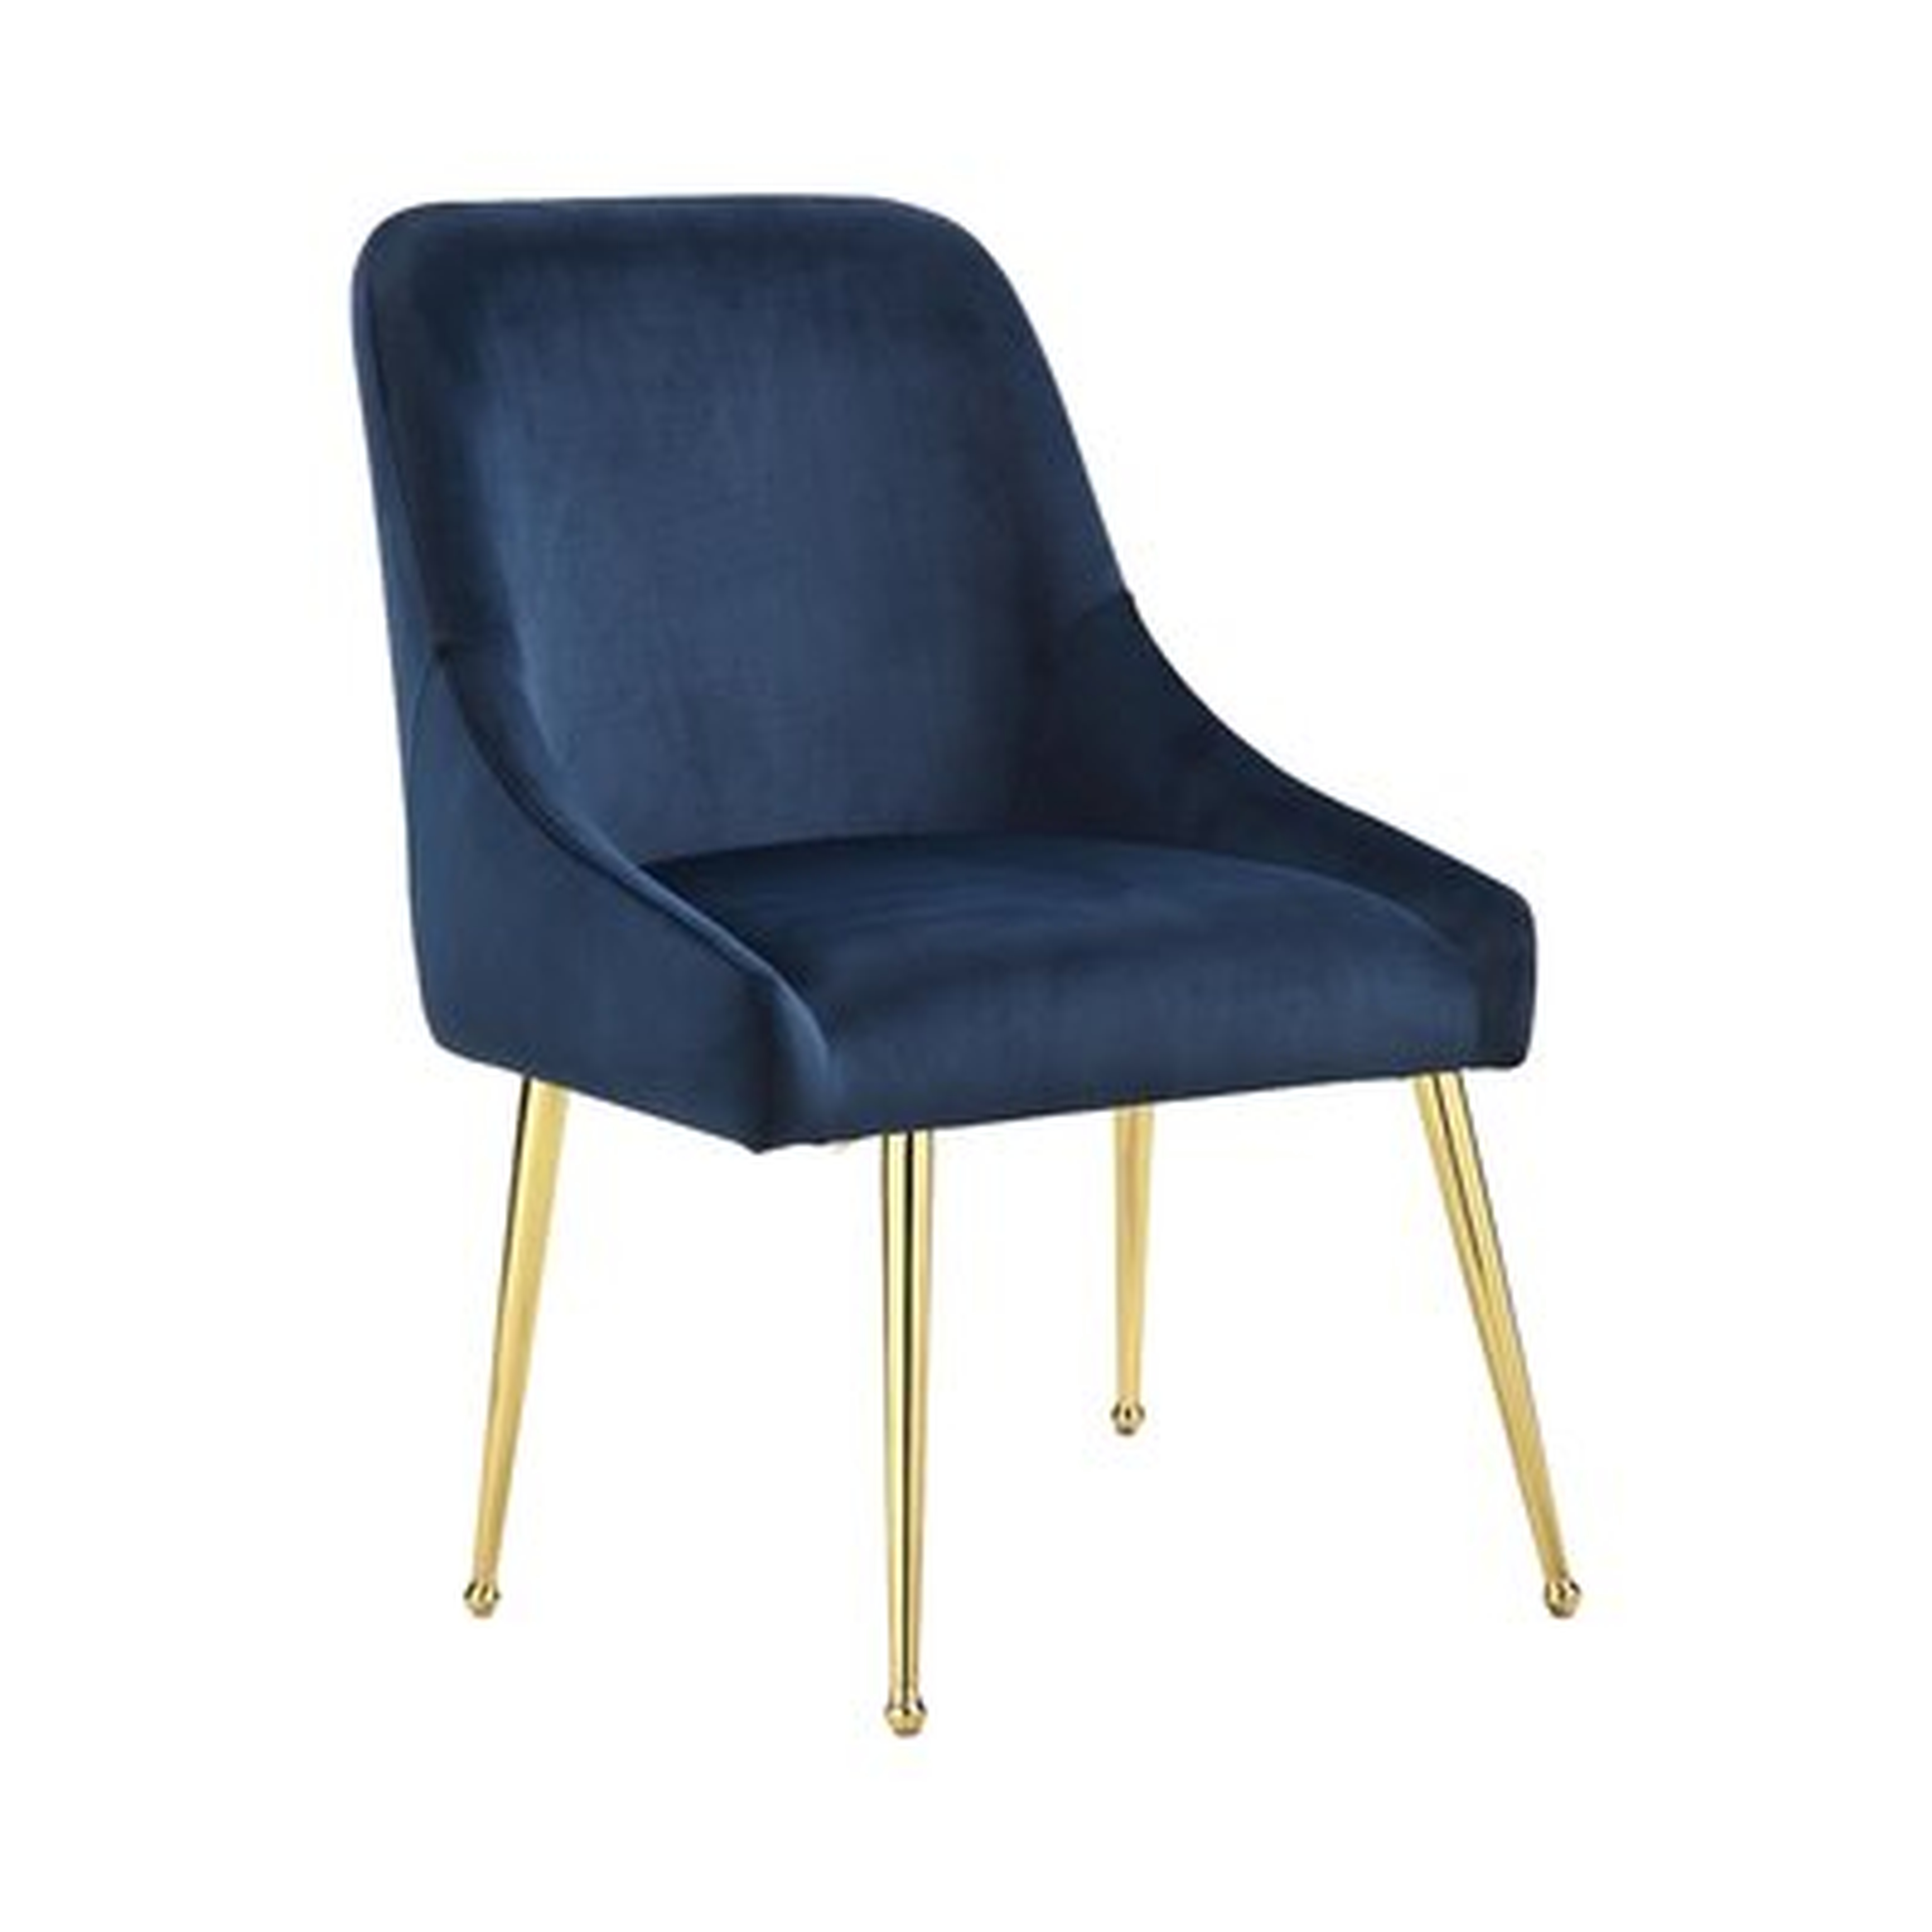 Tuley Upholstered Side Chair in Blue - Wayfair